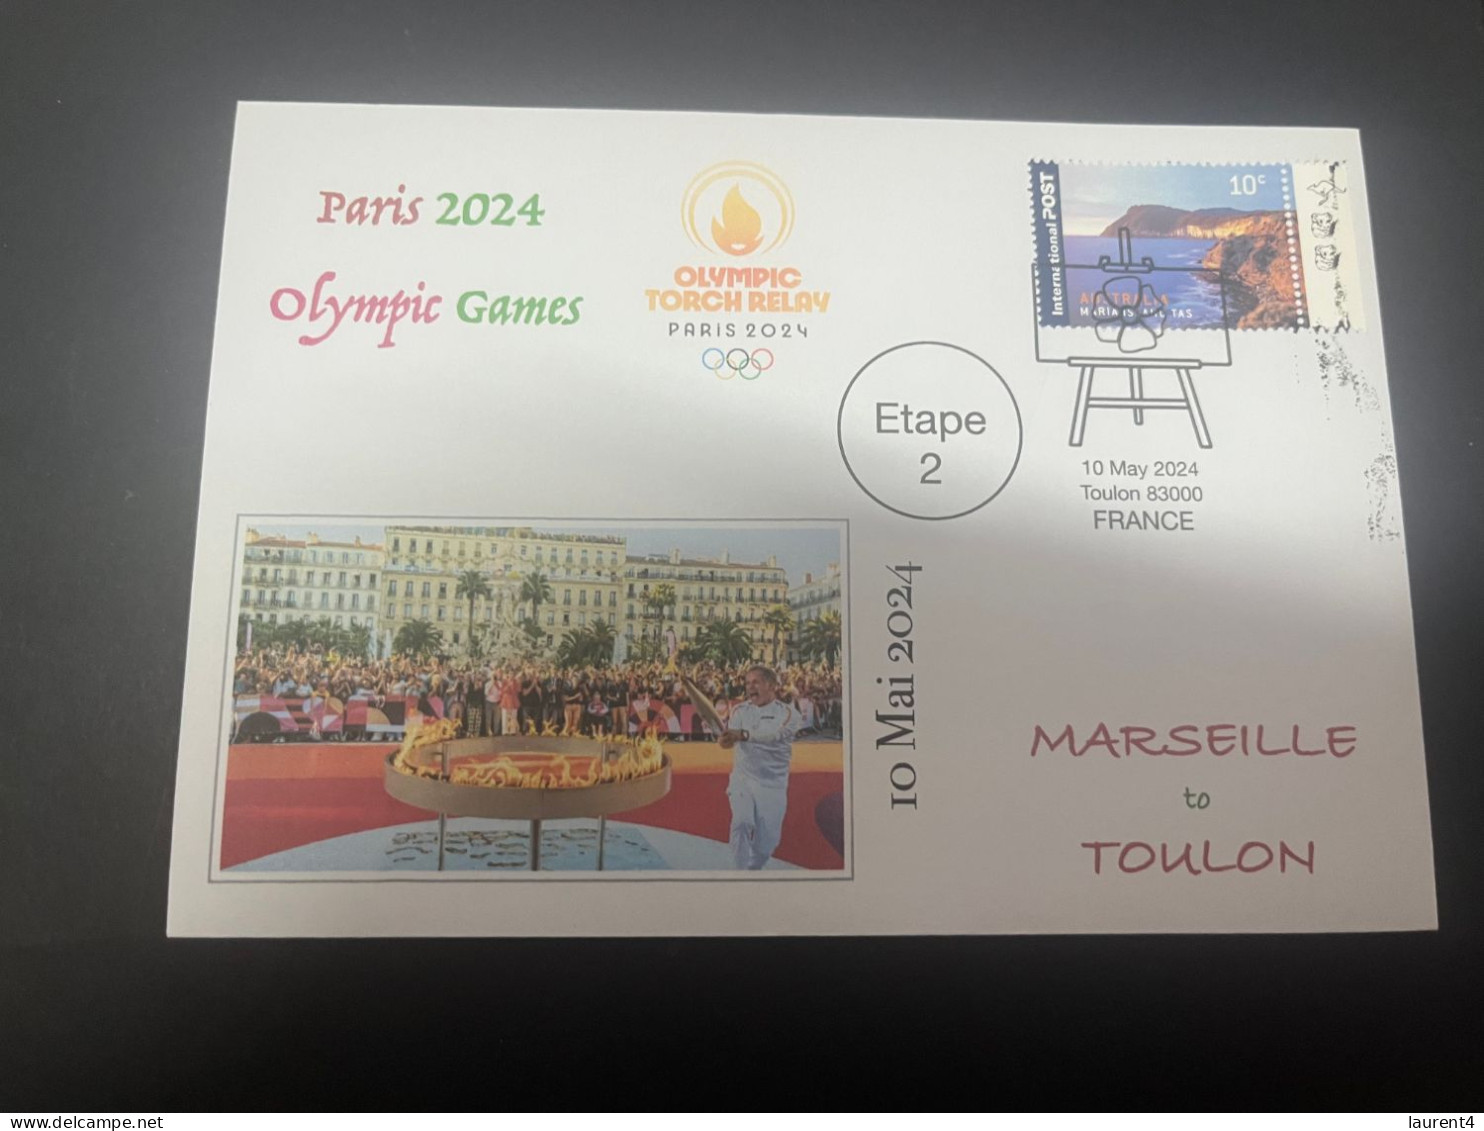 11-5-2024 (4 Z 42) Paris Olympic Games 2024 - Torch Relay (Etape 2) In Toulon (10-5-2024) With OZ Stamp - Zomer 2024: Parijs